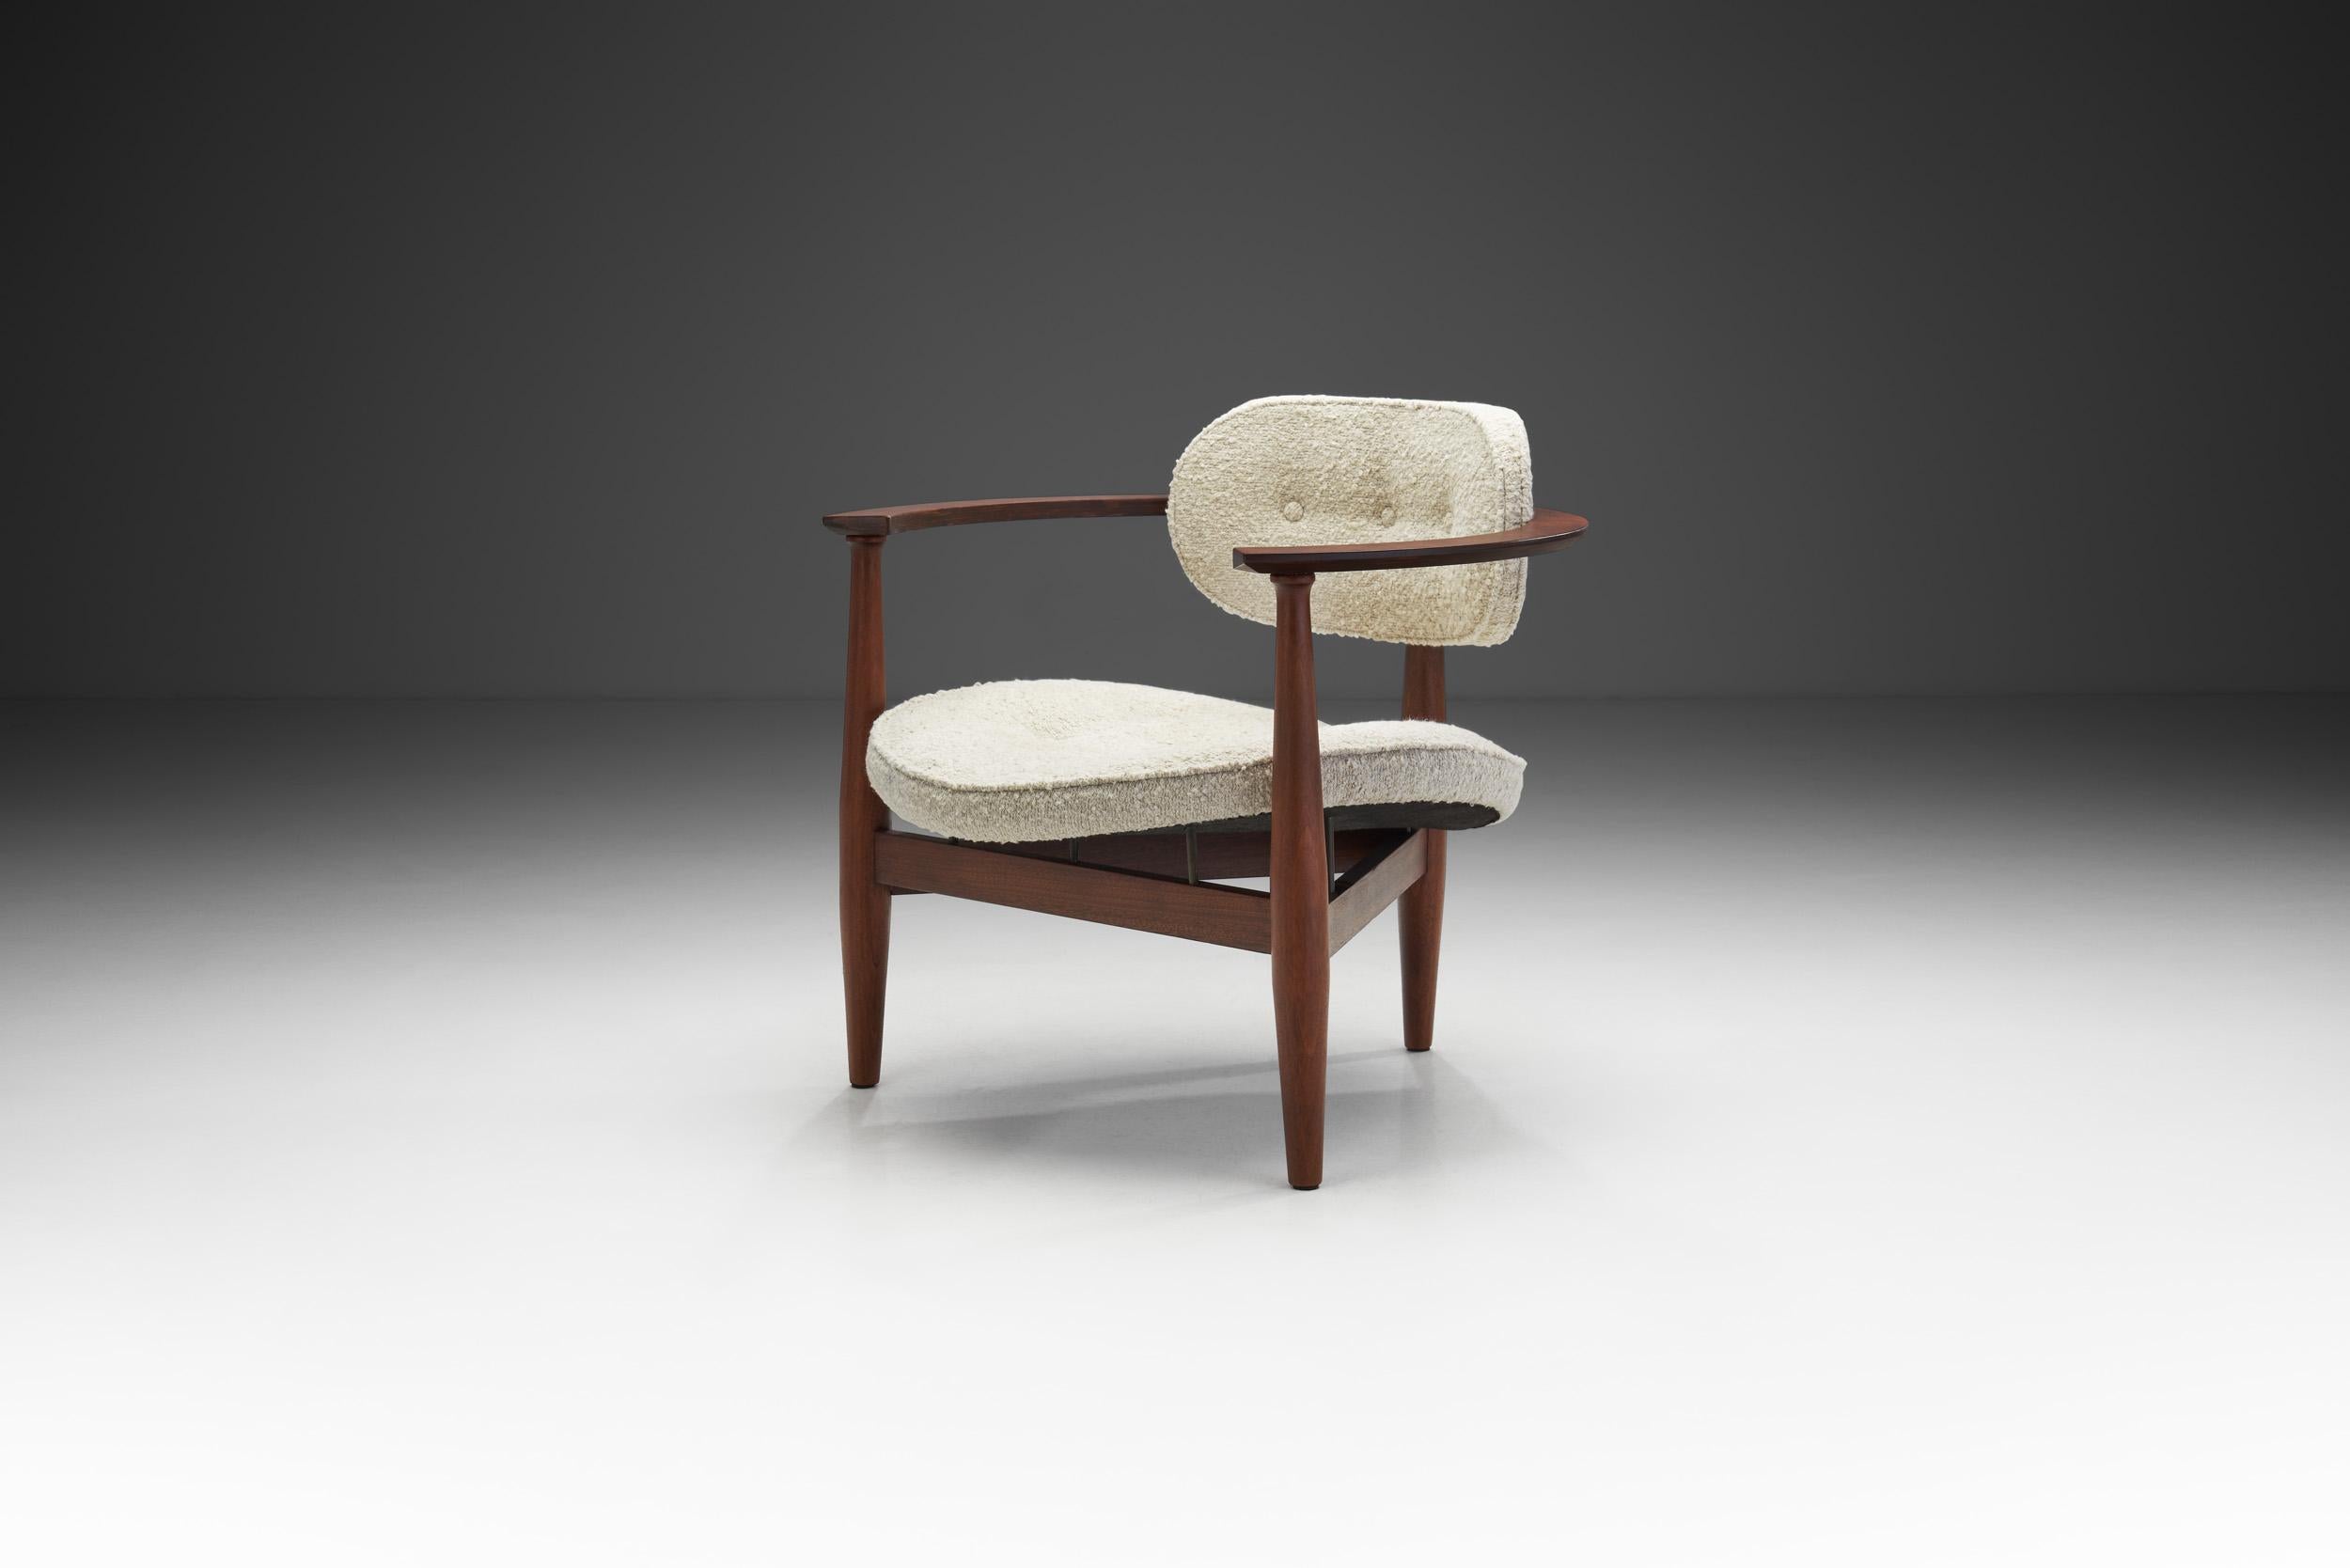 This exceptional chair has a peculiar design with numerous qualities that distinguish it from its contemporaries, even from mid-century chair designs in general. From the shell seat to the circular arm and tripod legs, this model is stunning from